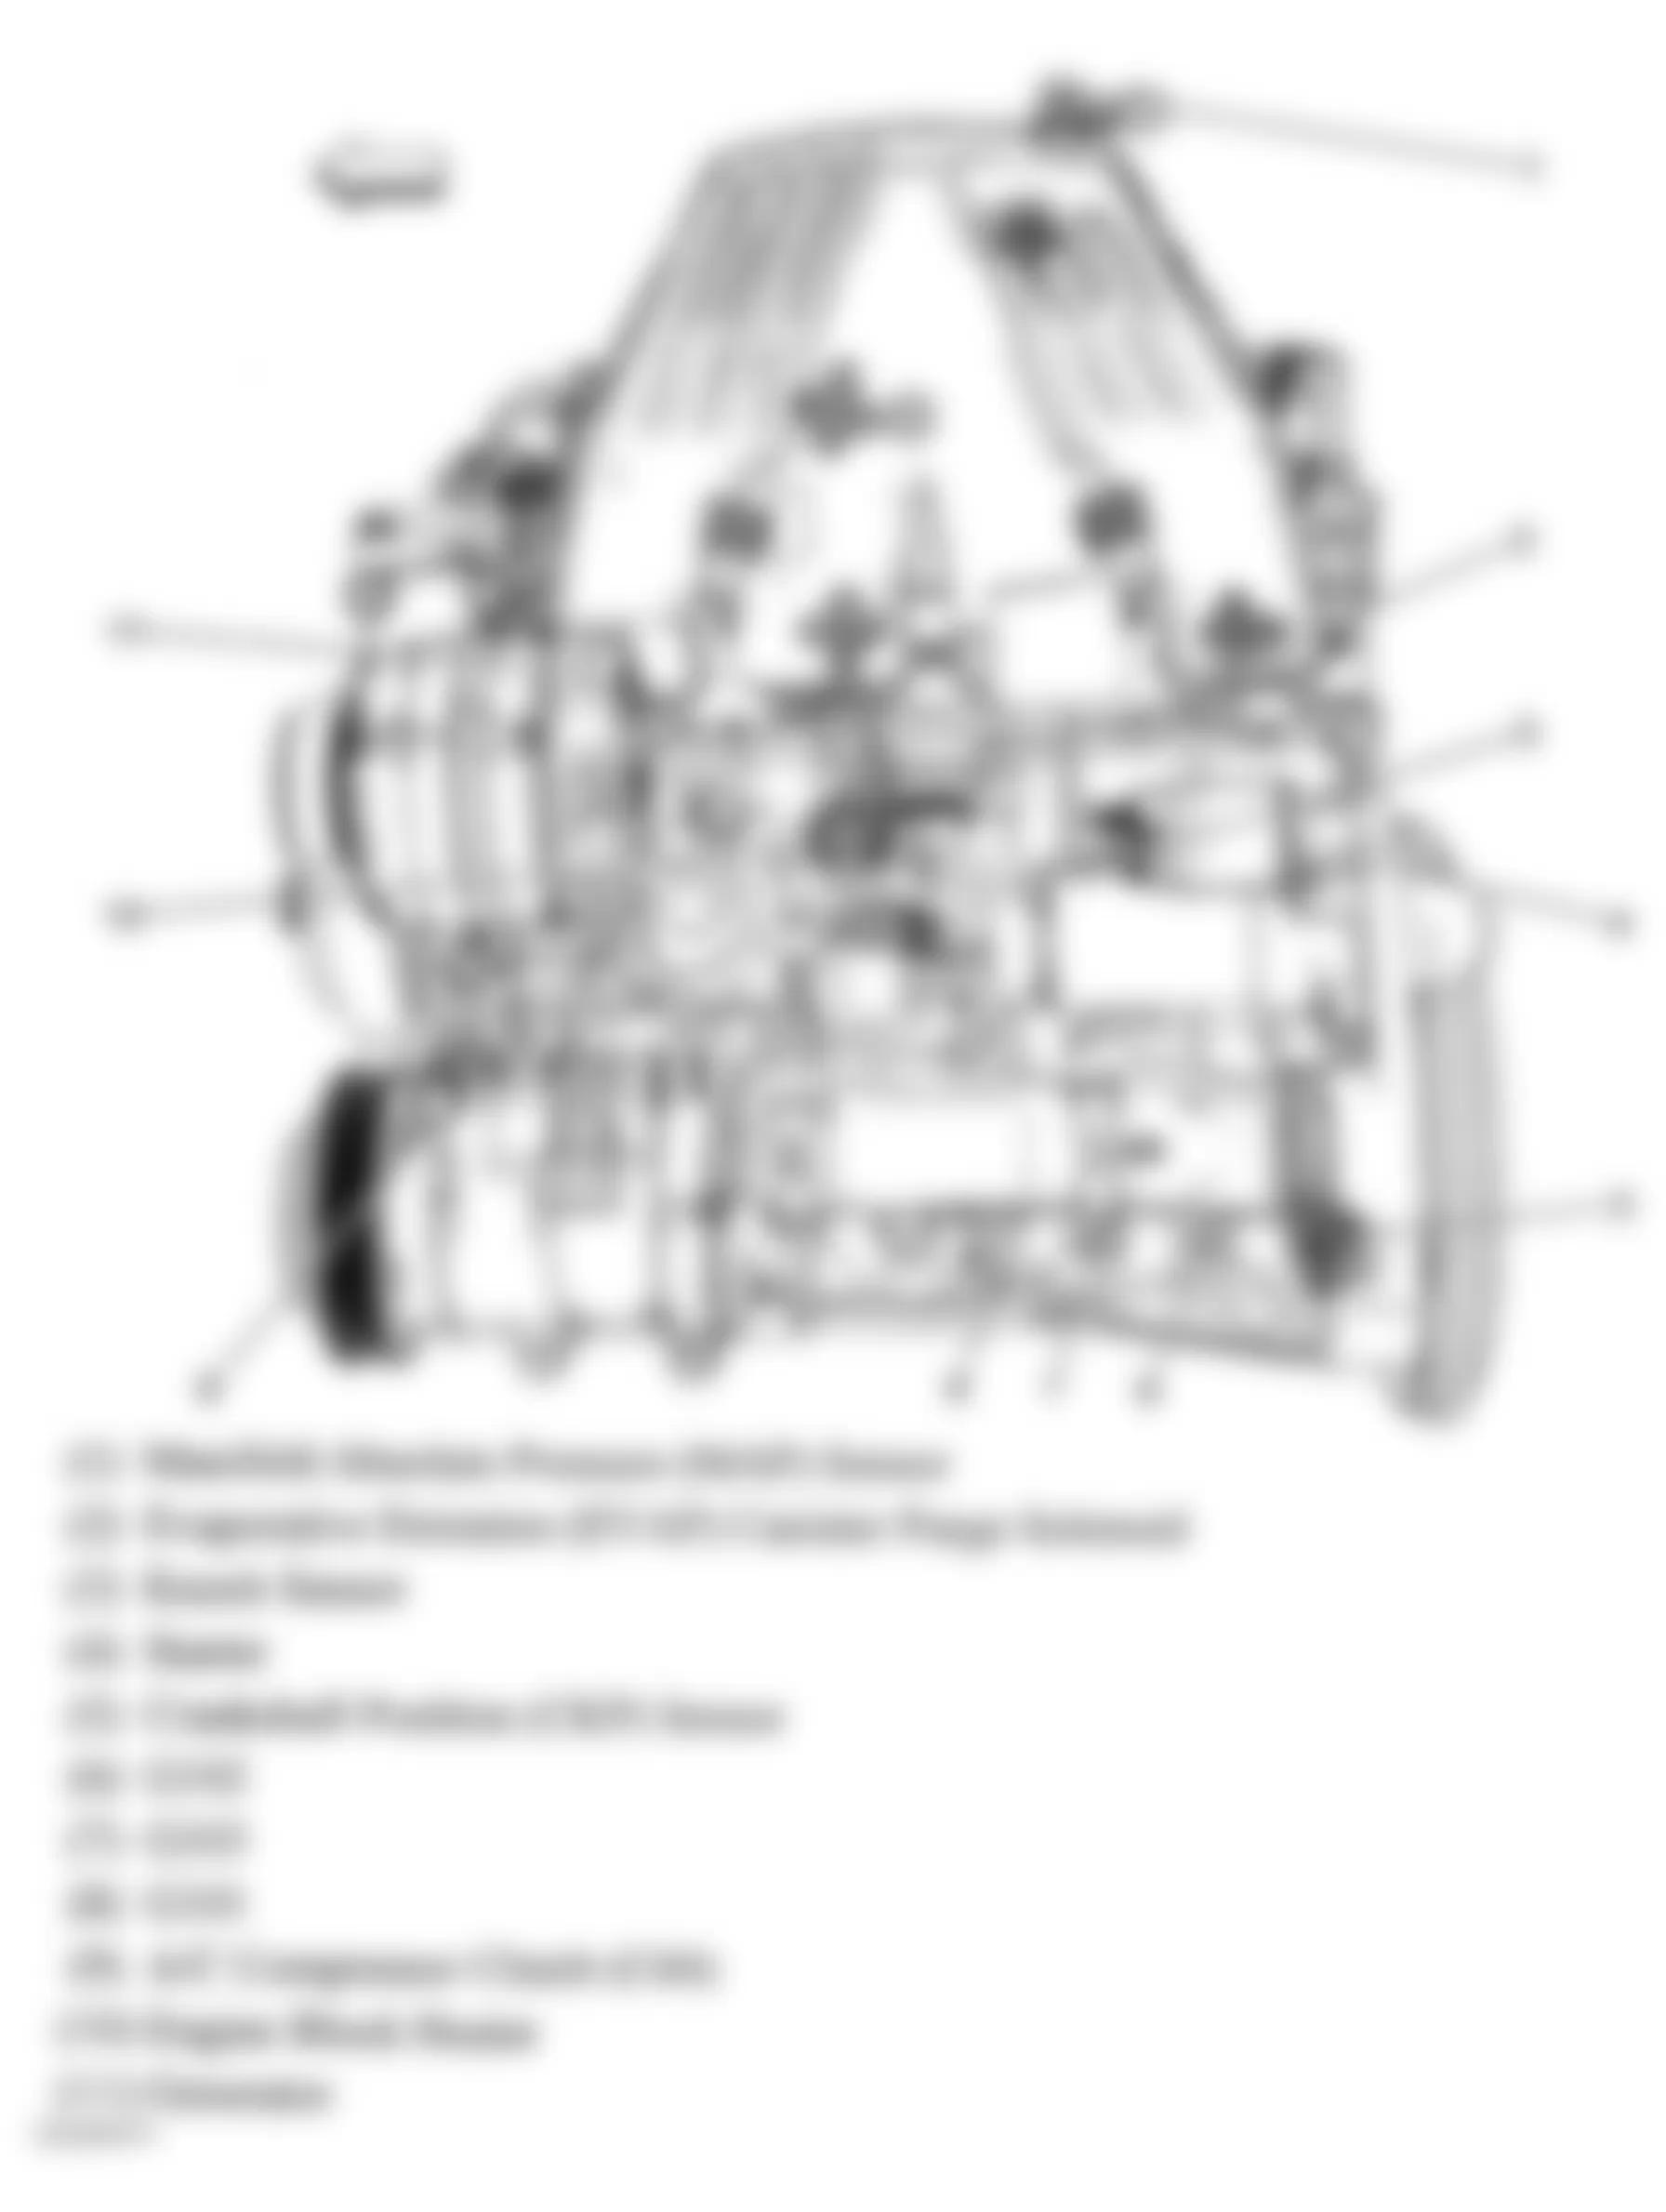 Chevrolet Colorado 2005 - Component Locations -  Top View Of Engine (2.8L)